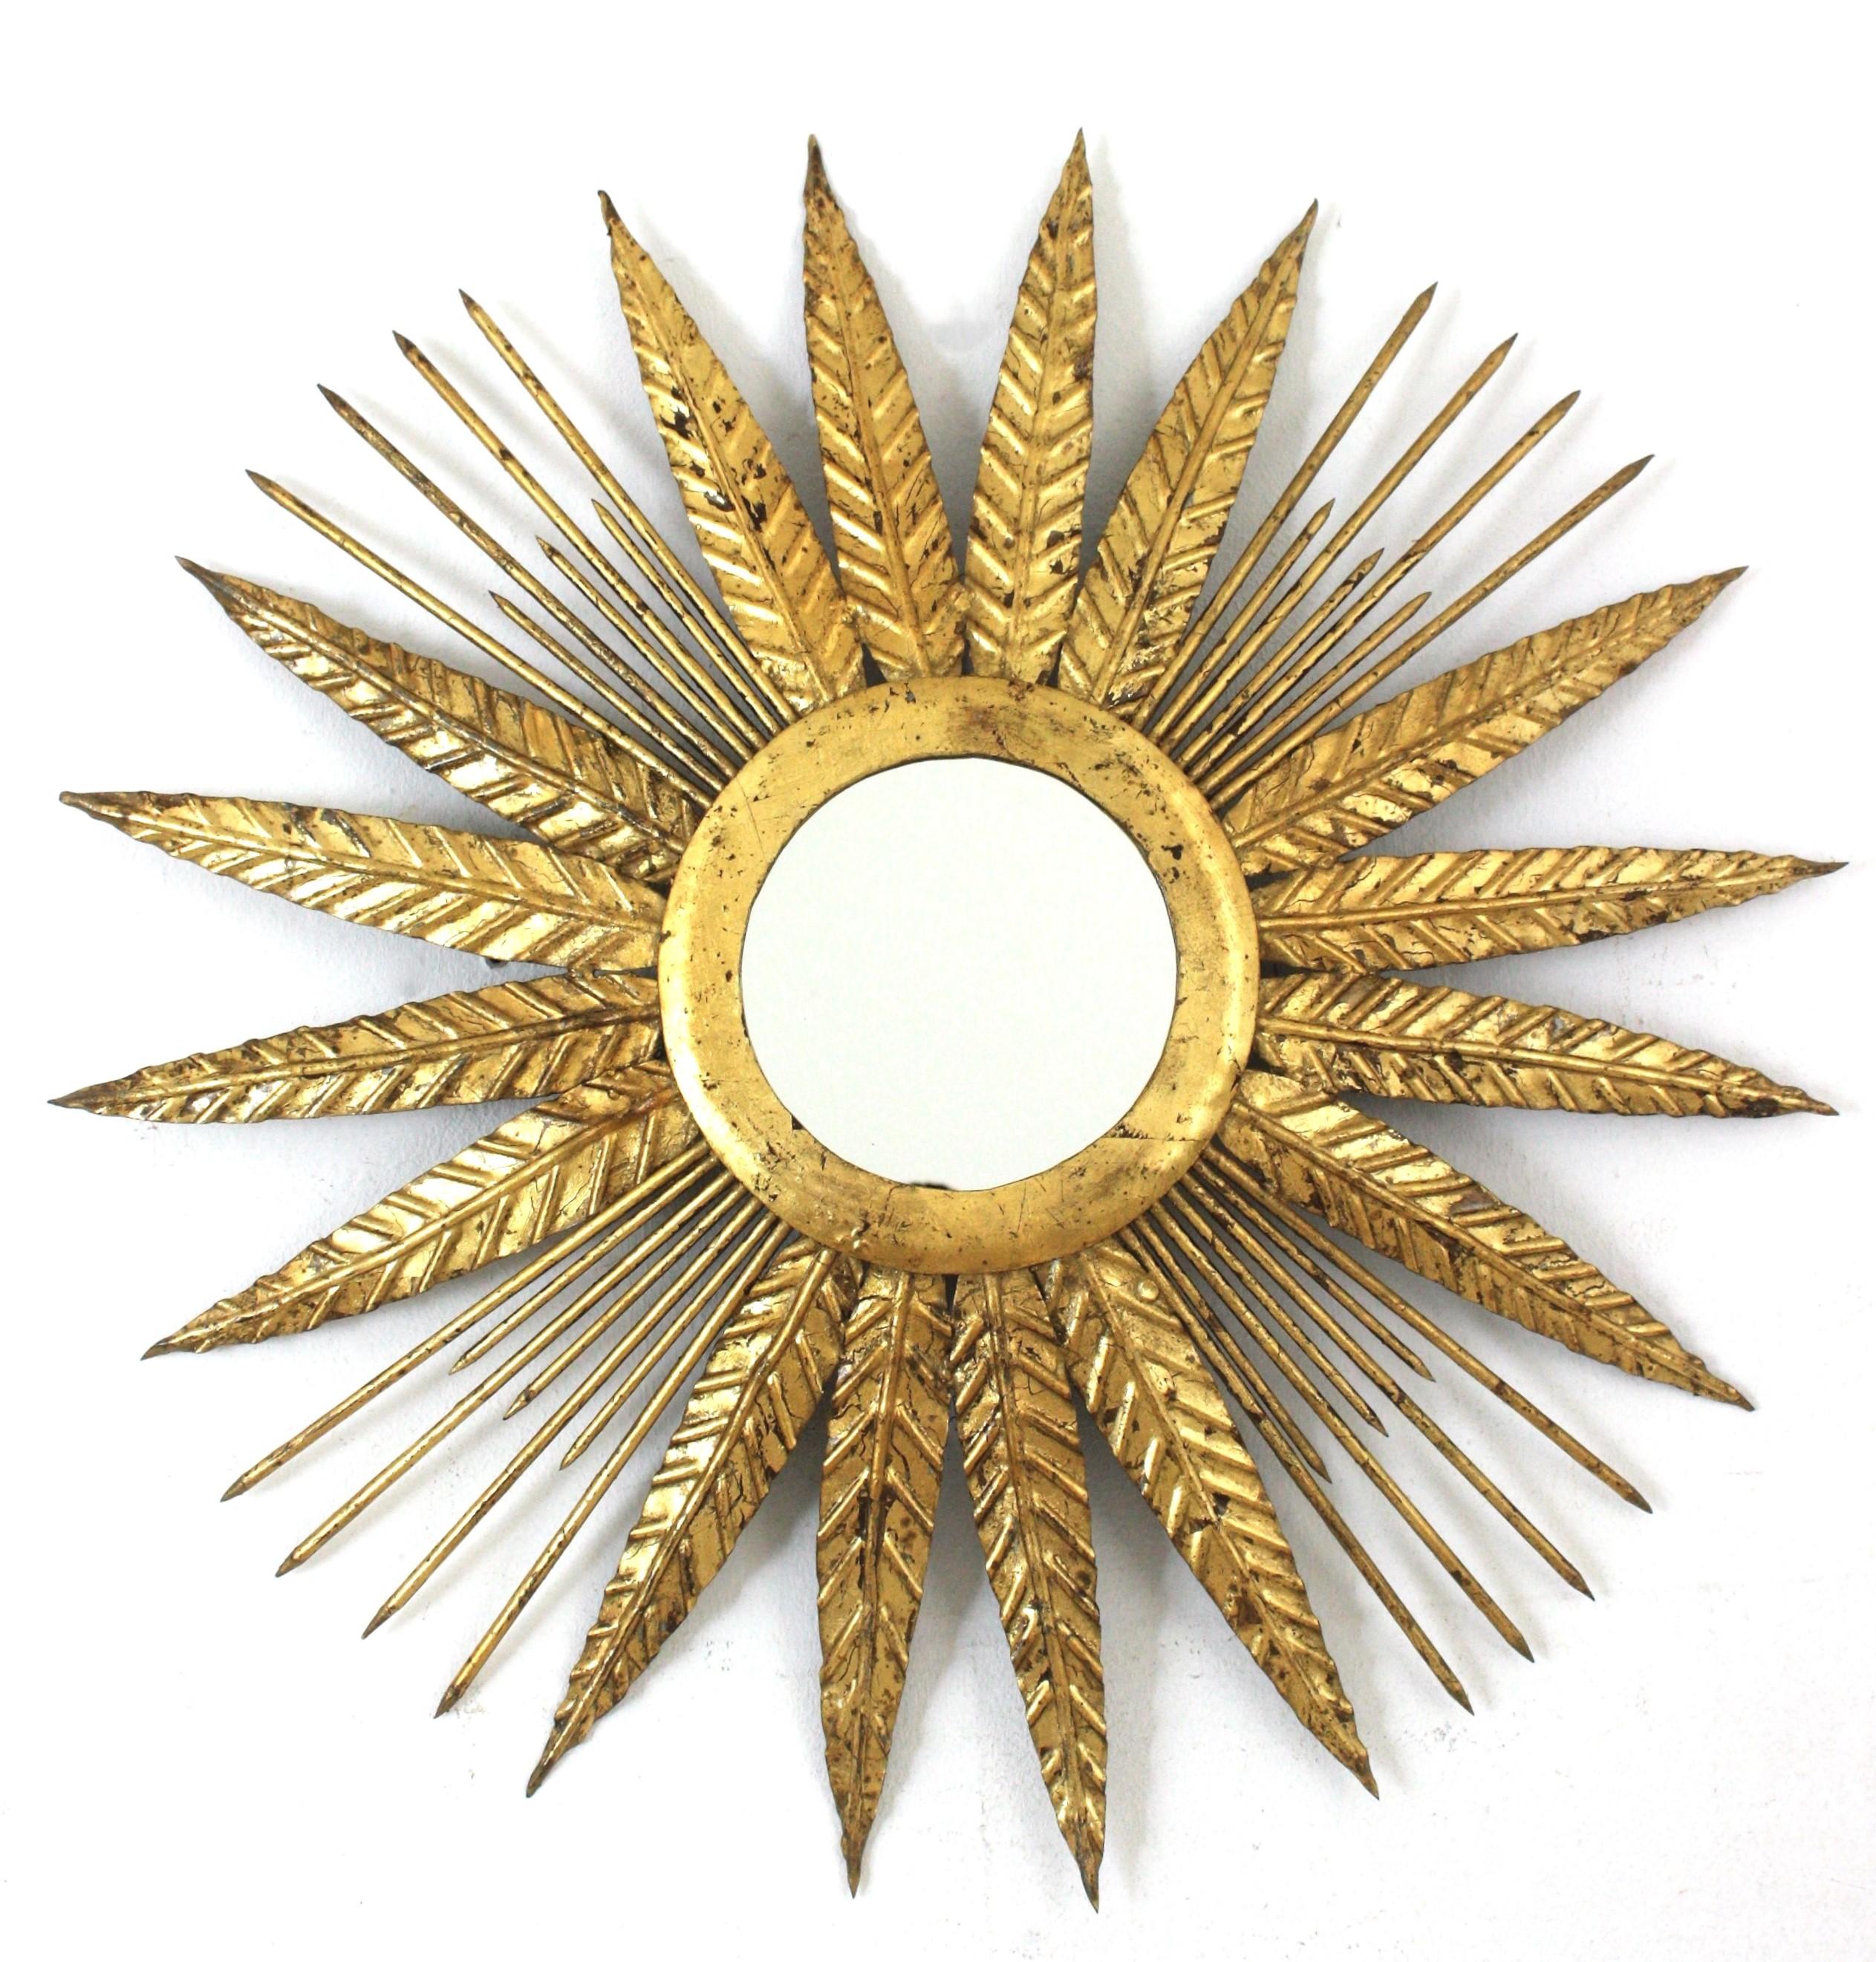 French Sunburst Mirror in Gilt Iron with Spikey Leafed Frame, 1940s For Sale 5